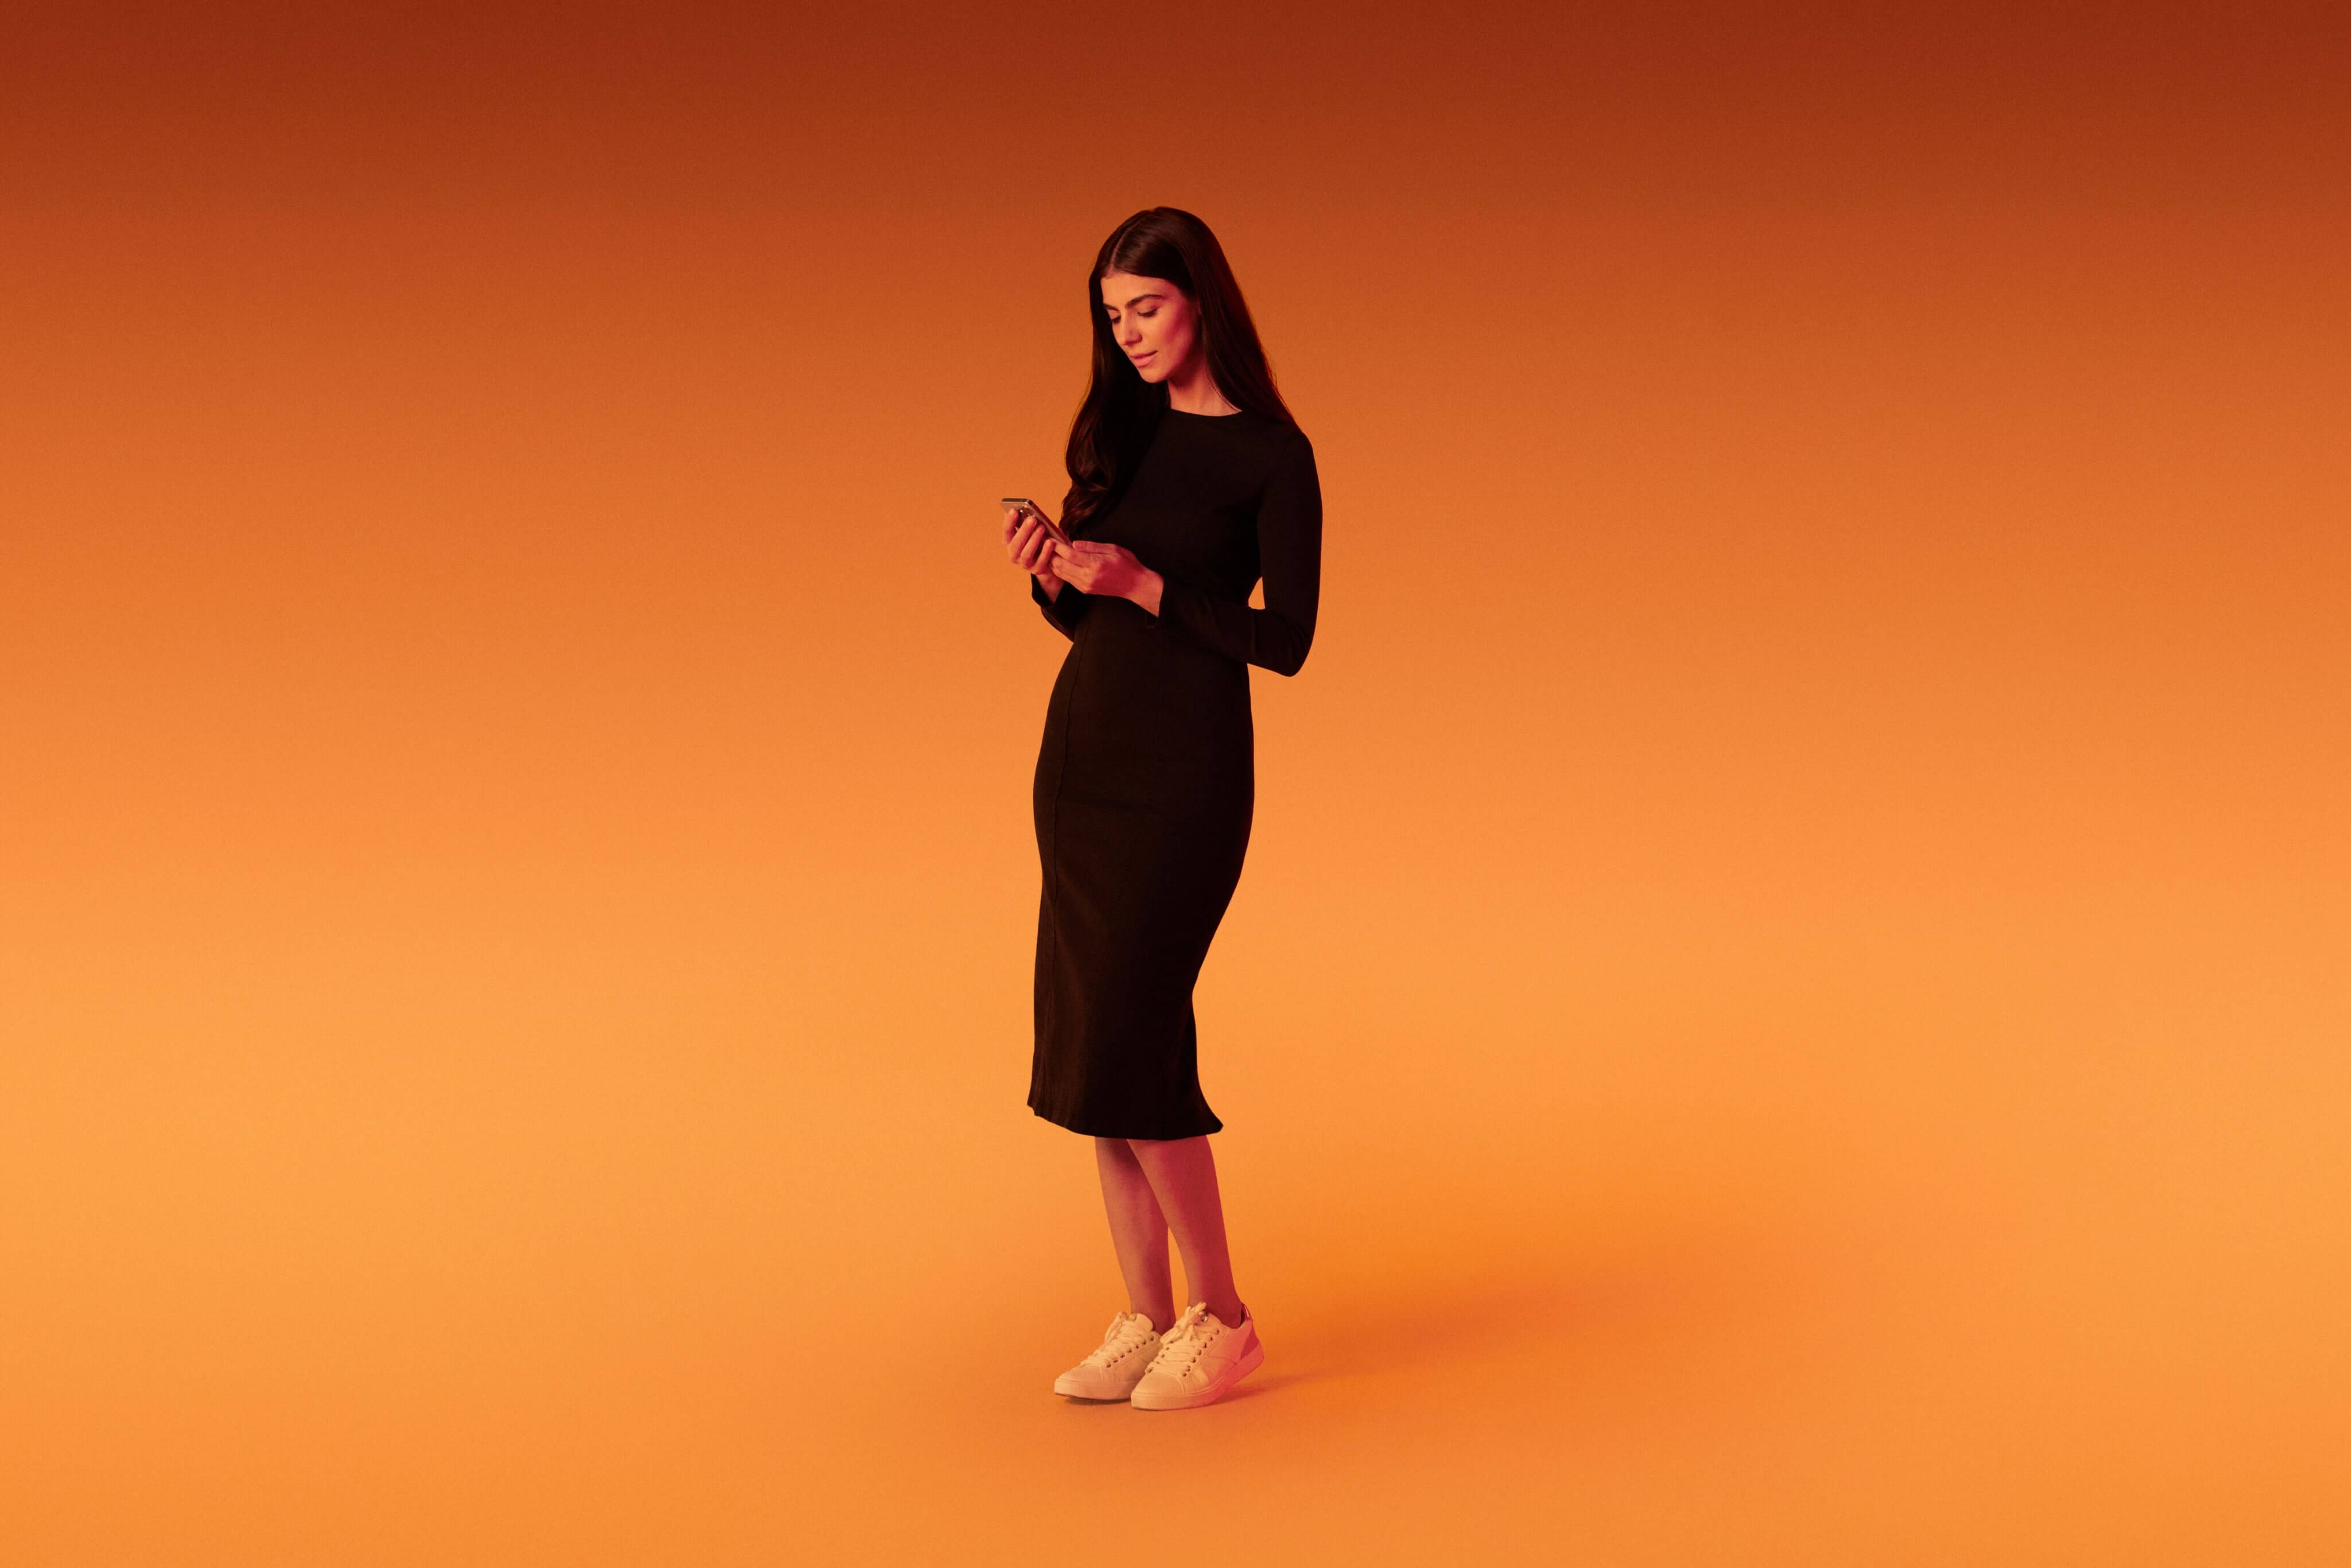 tanding woman engaging with the Xapo Bank app on her mobile phone, overlaid with an orange hue.